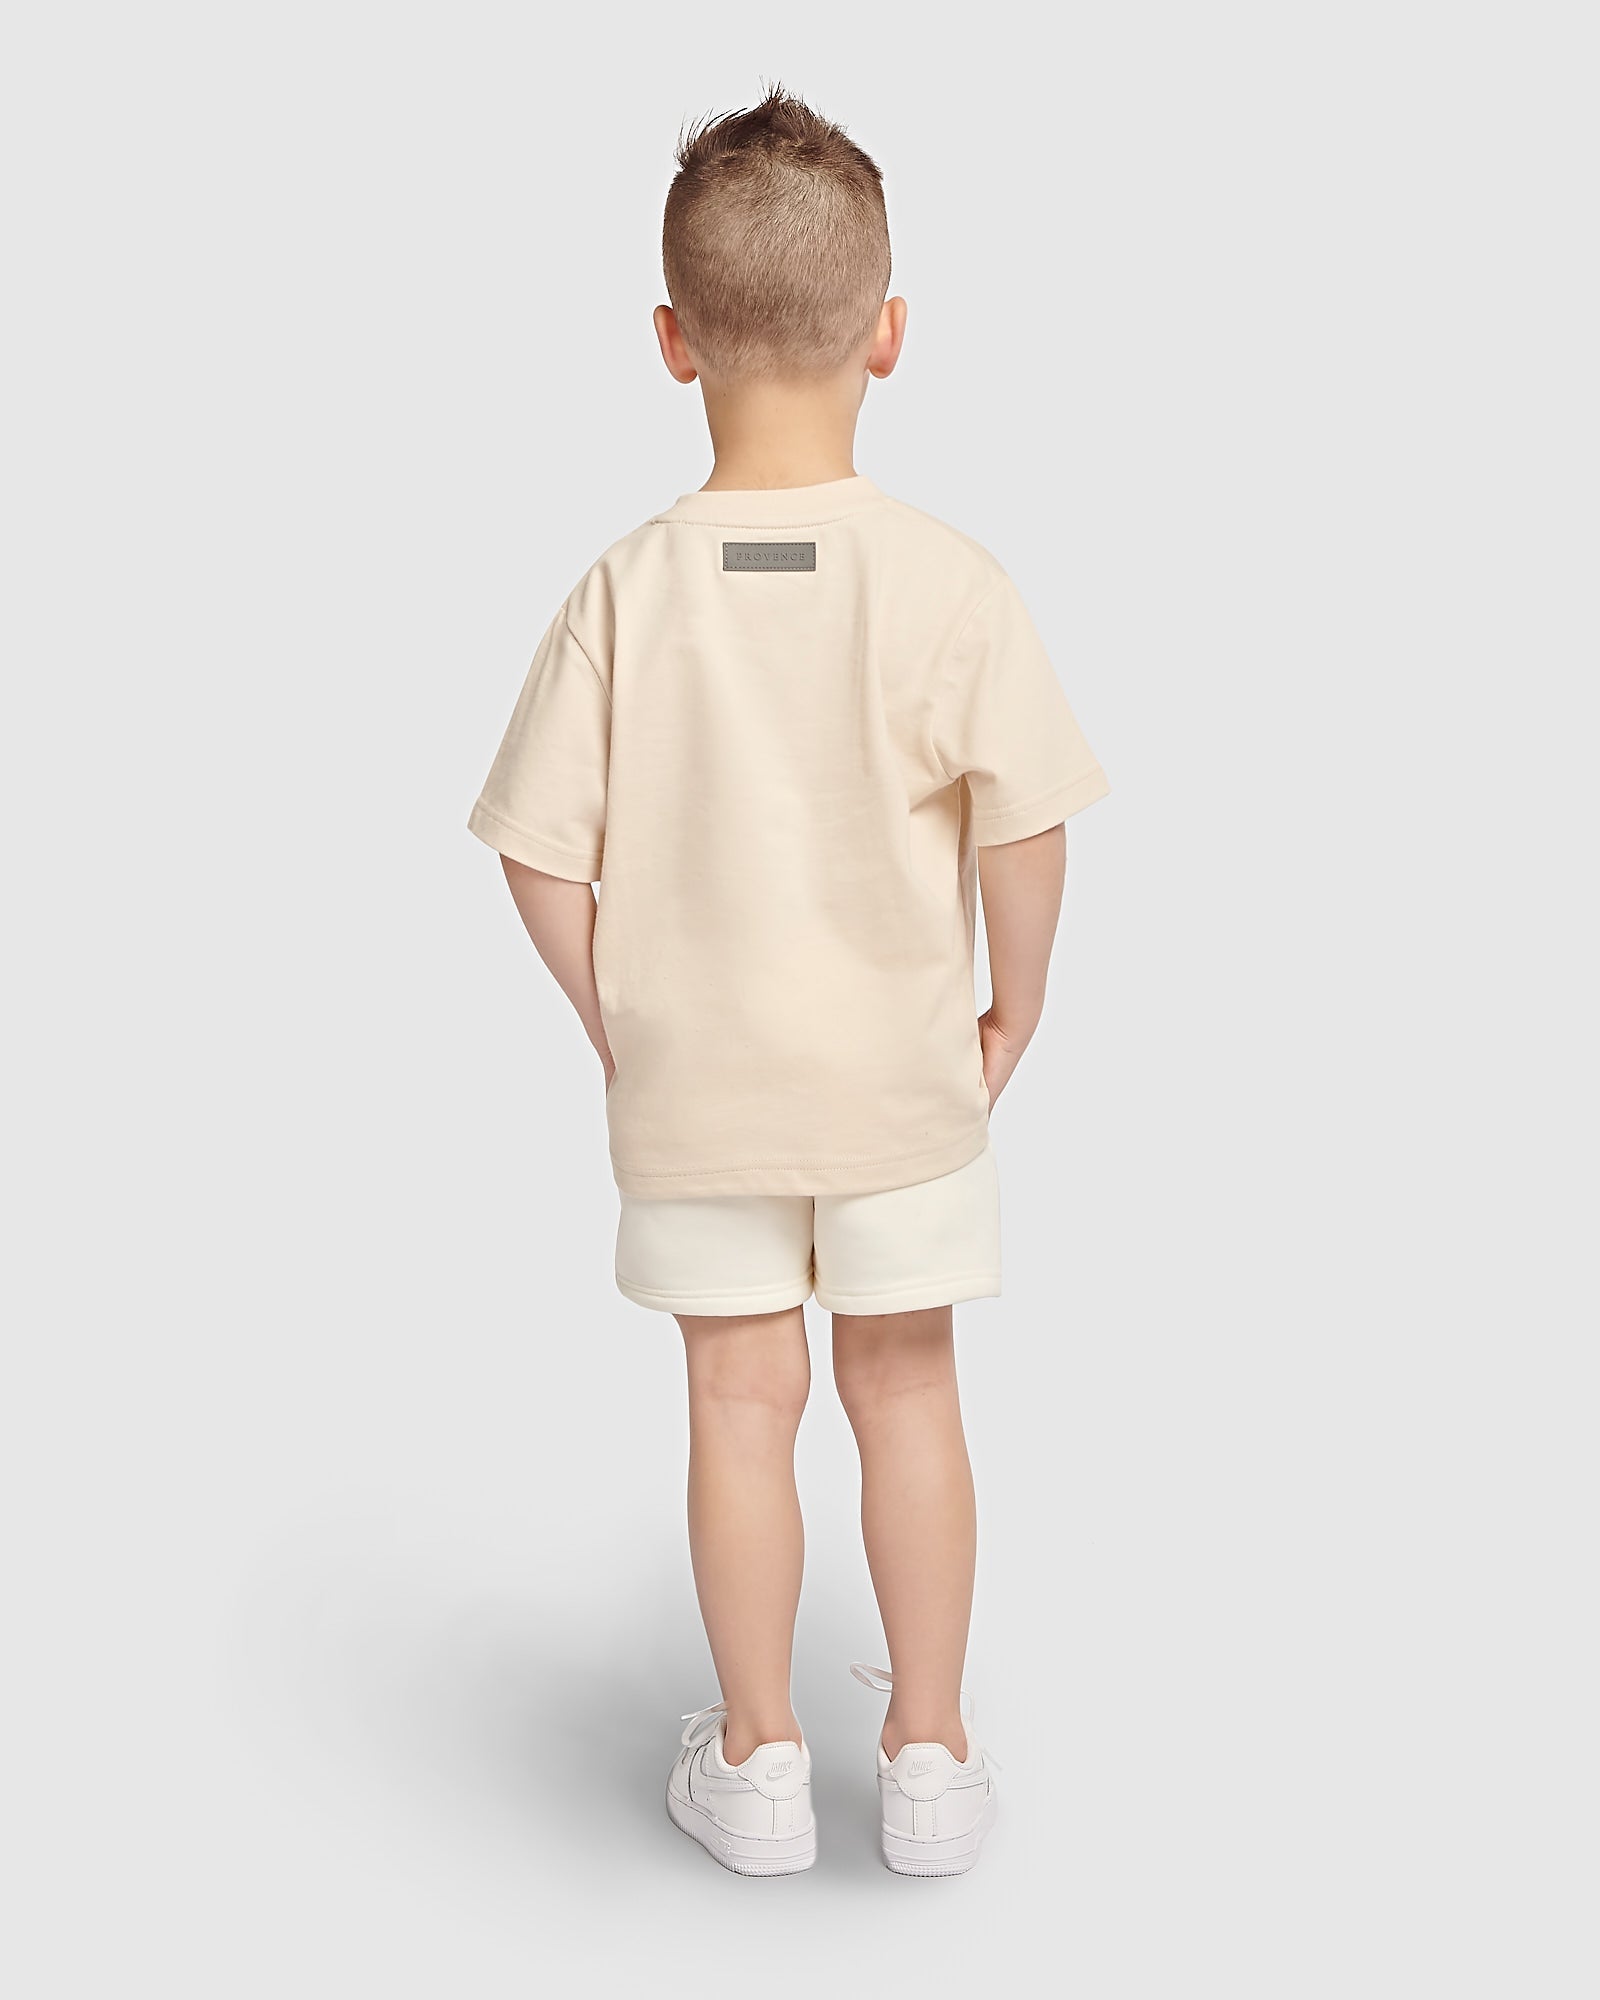 Kids Two Pack Embroidery T-Shirt